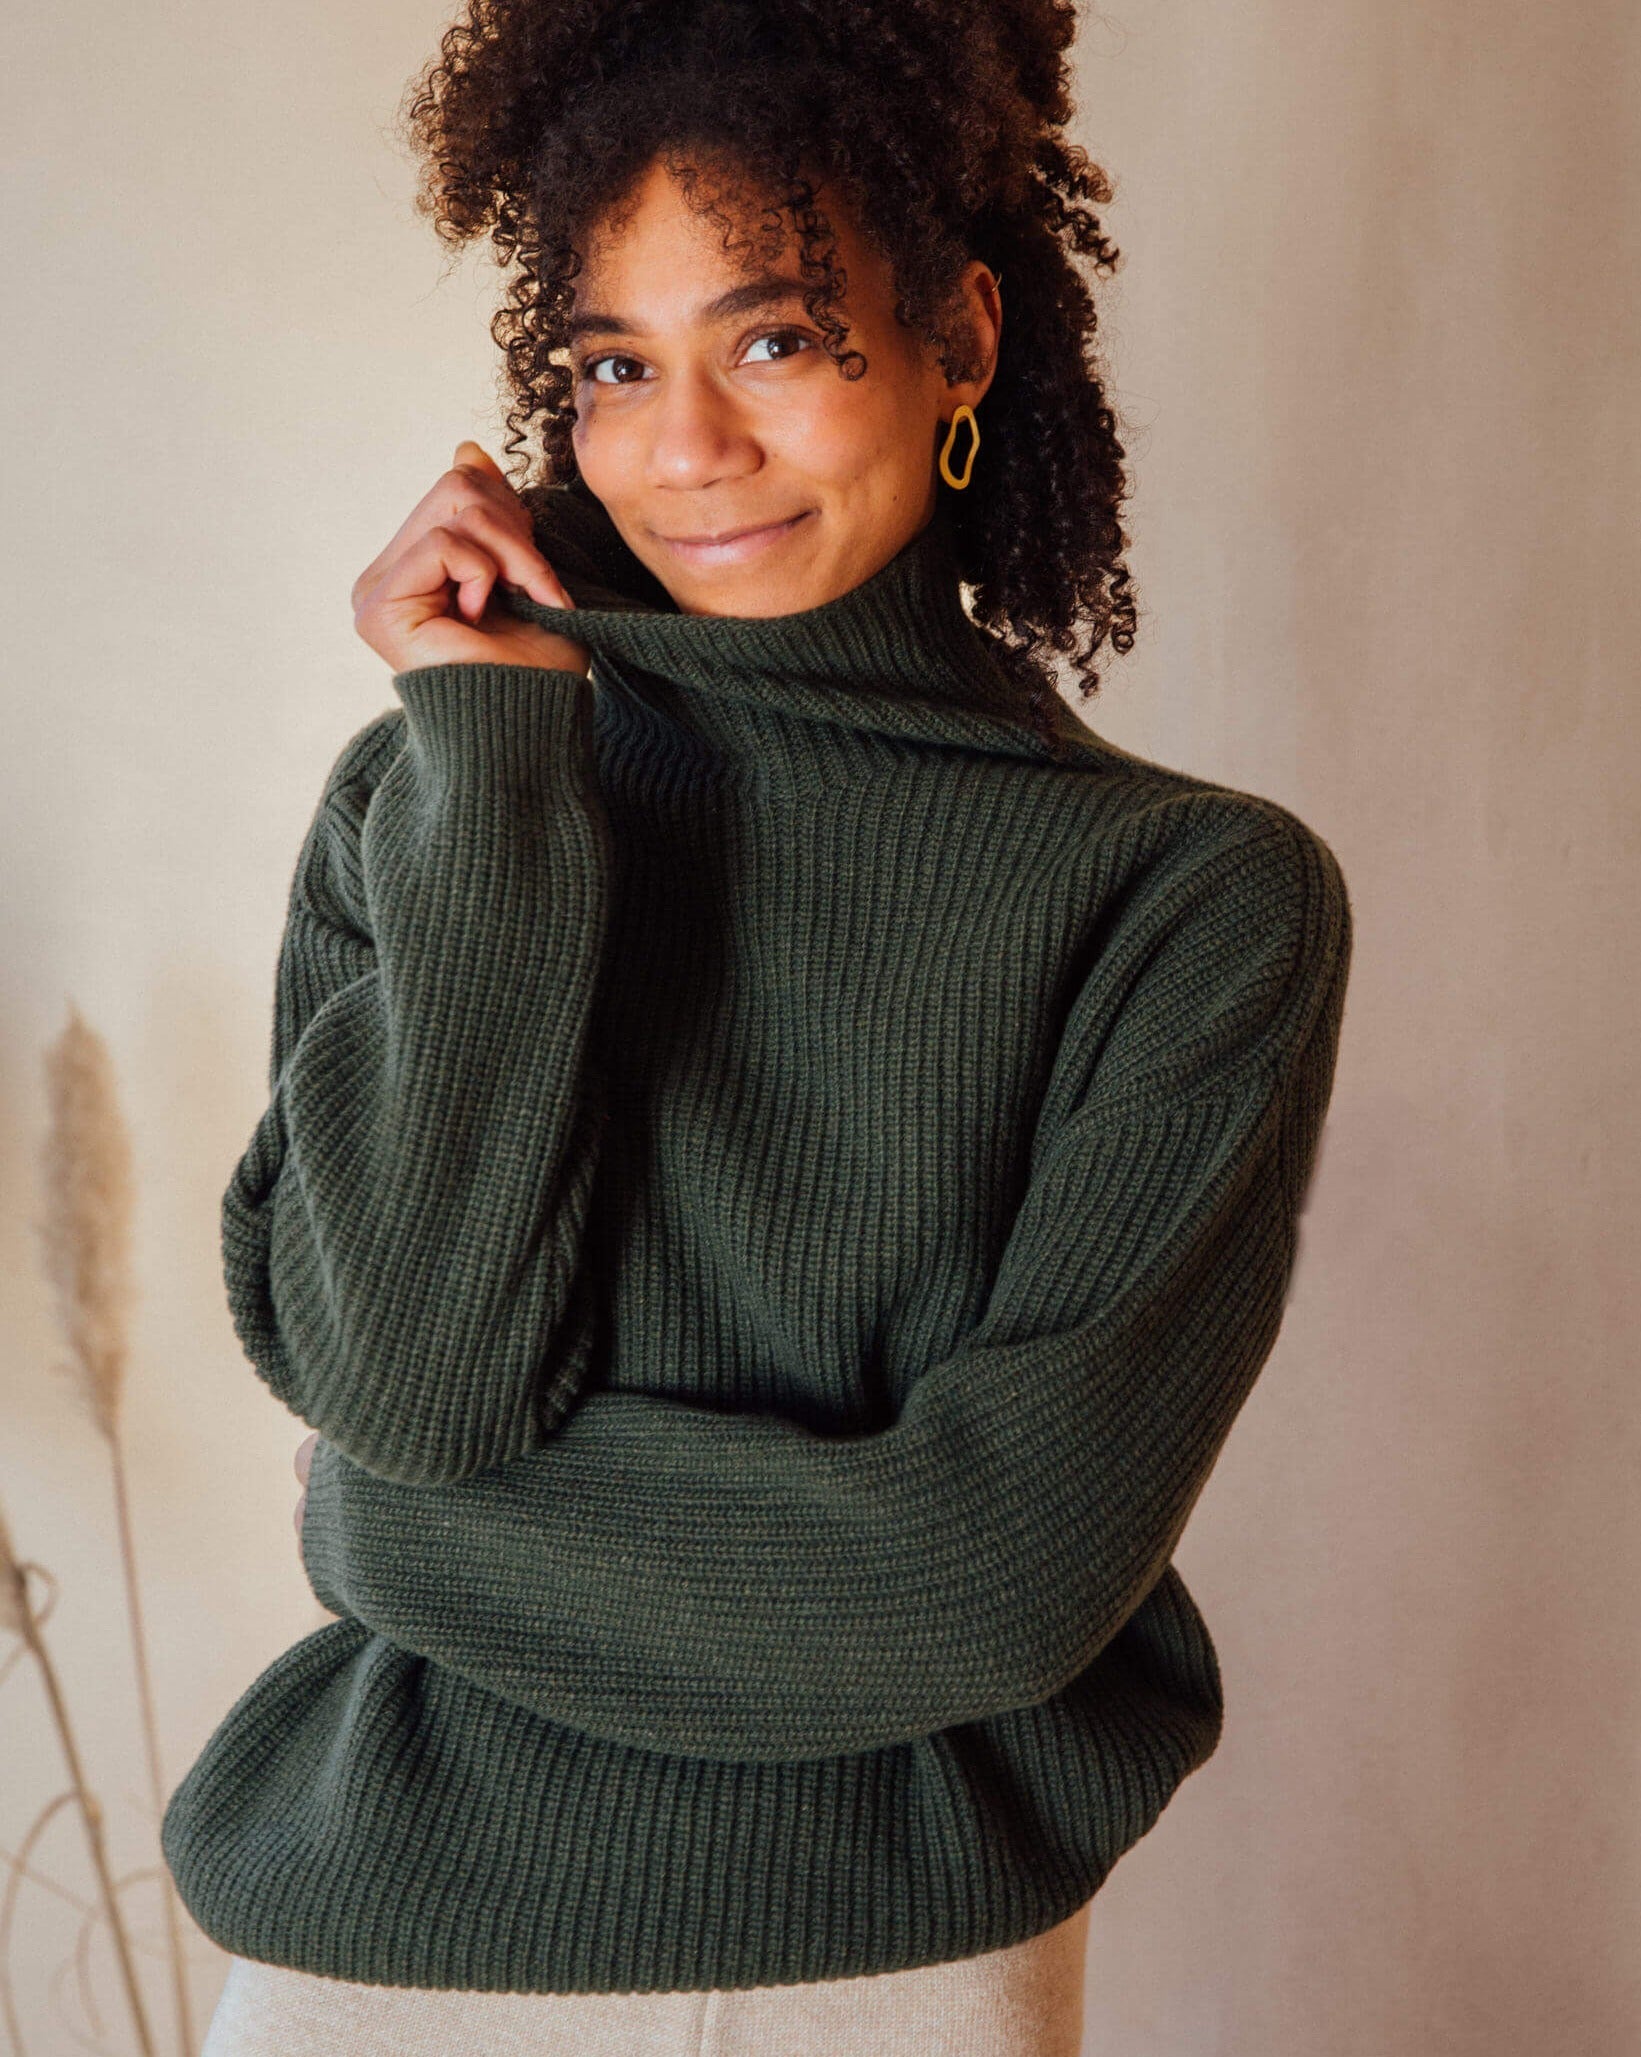 Loden green turtleneck sweater from Matona made from recycled wool blend